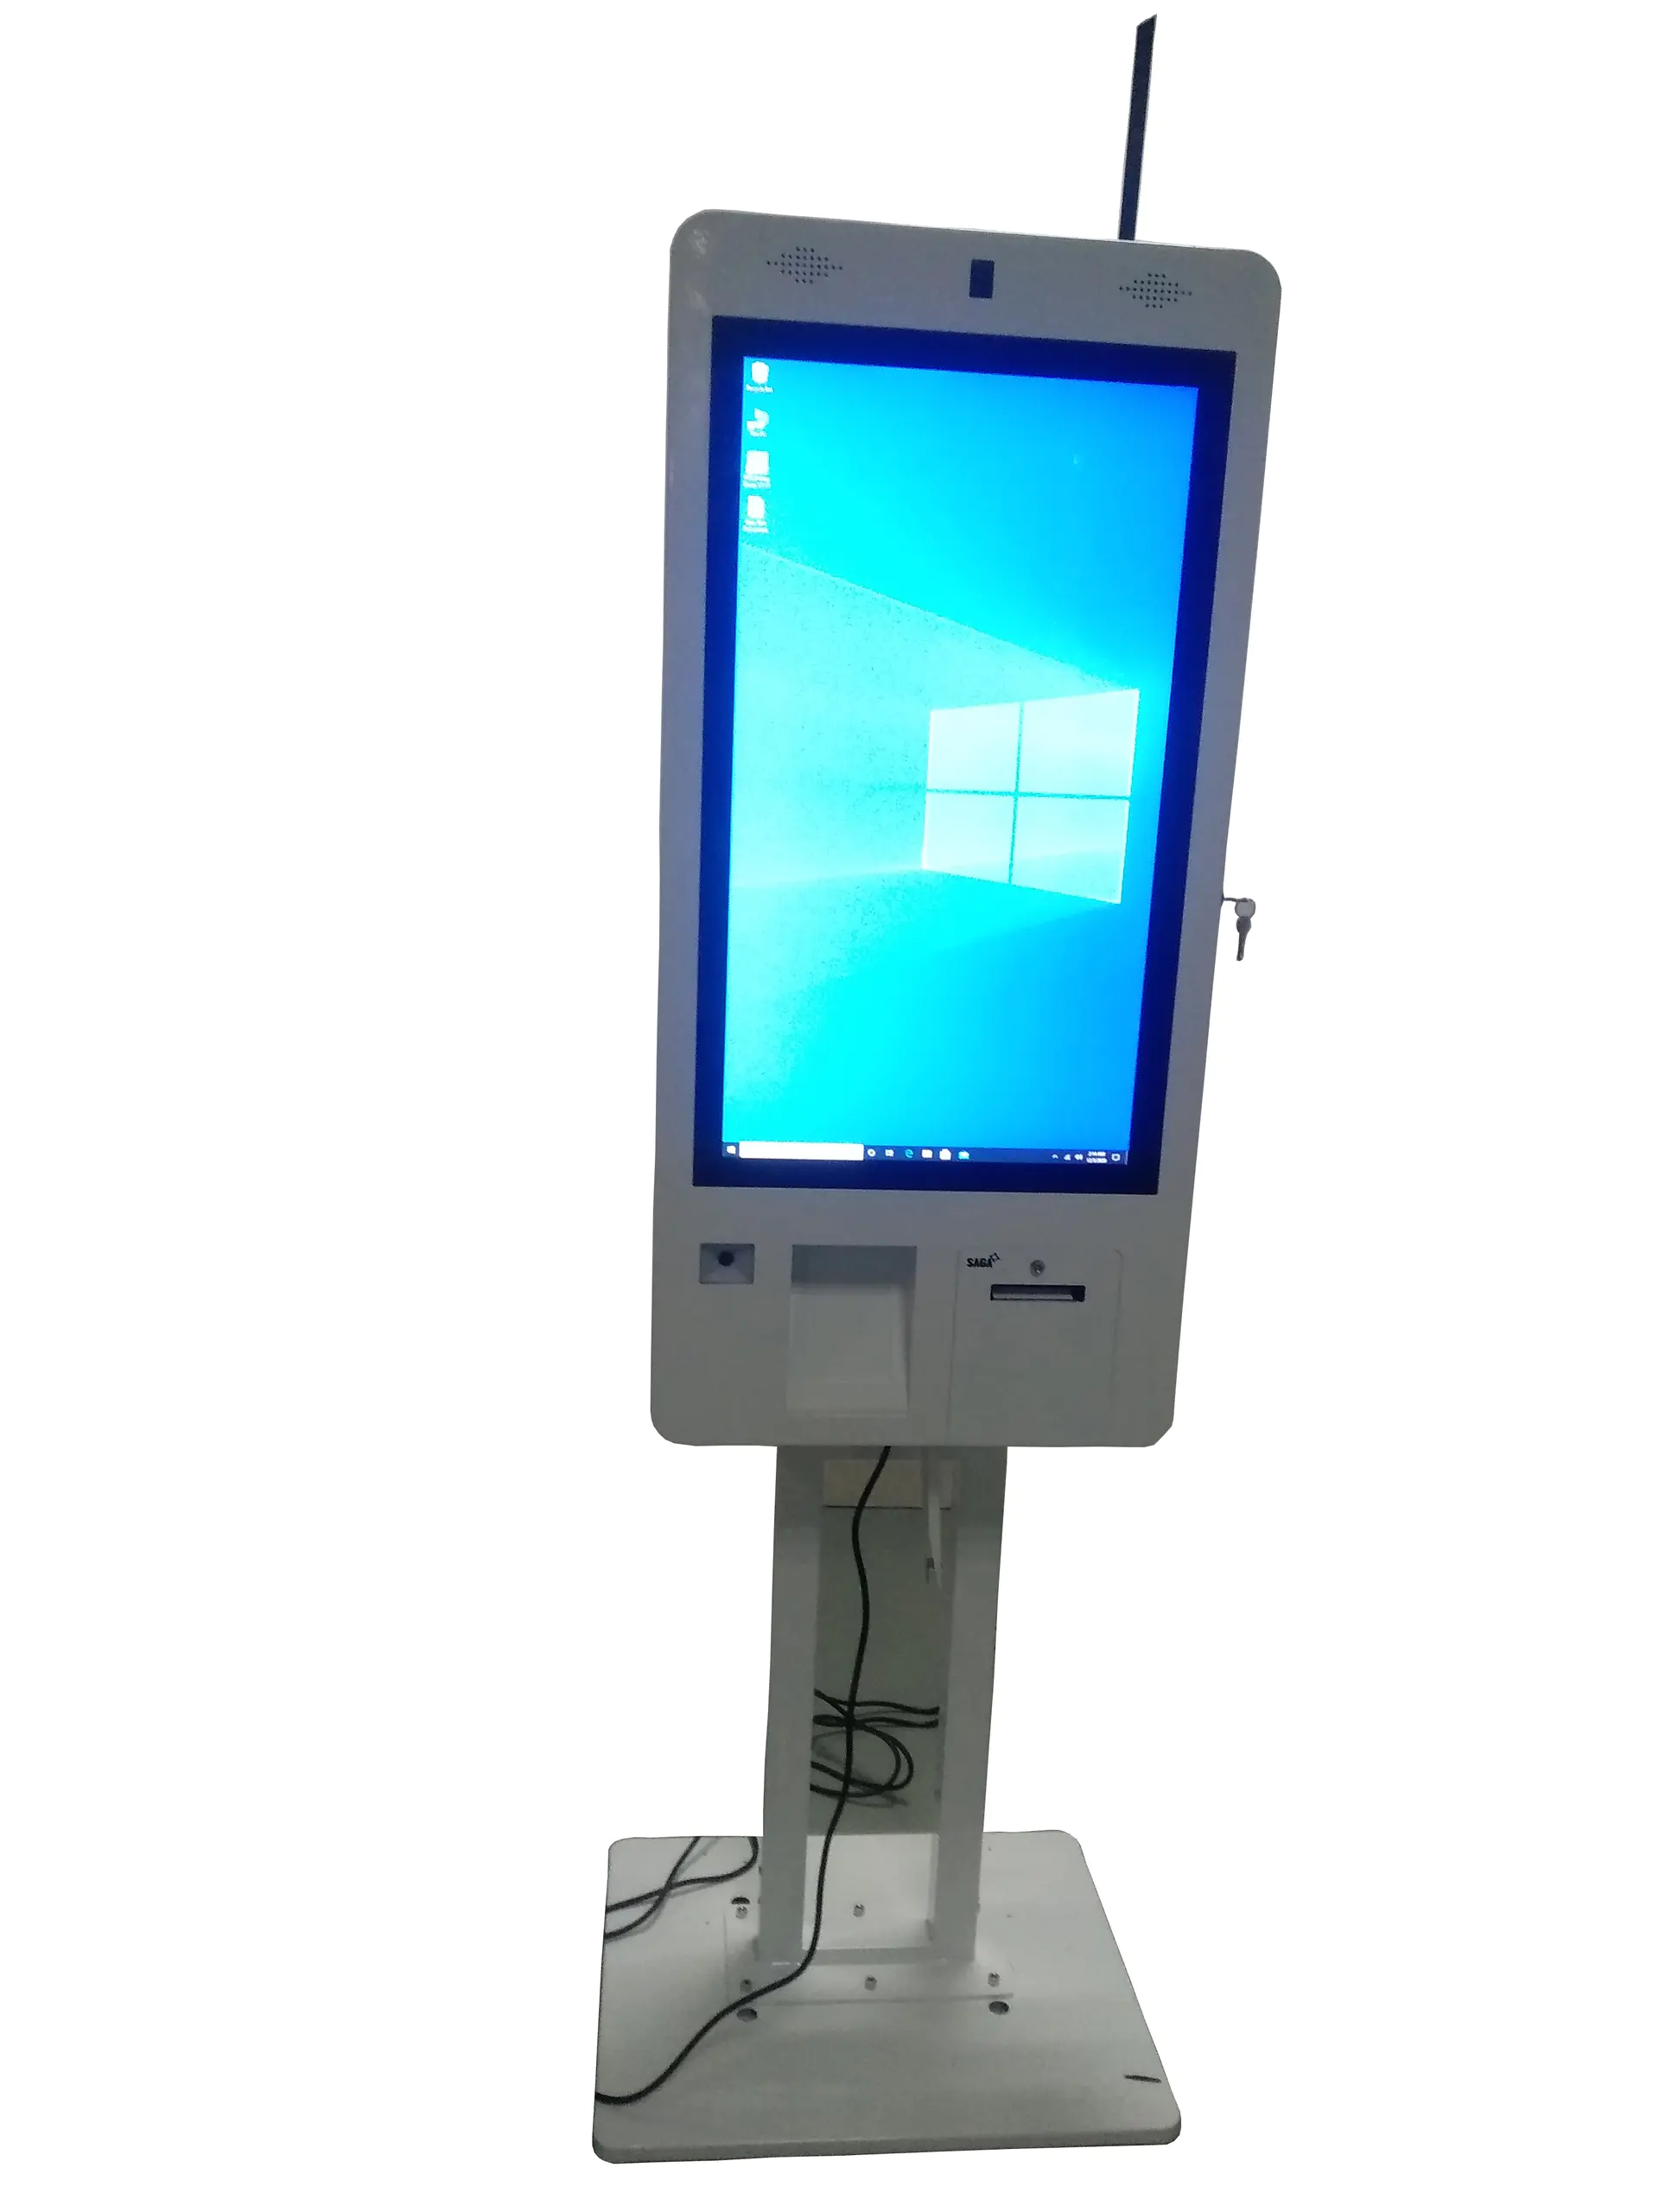 digital signage restaurant kiosk with QR code scanner printing tailormade touchscreen